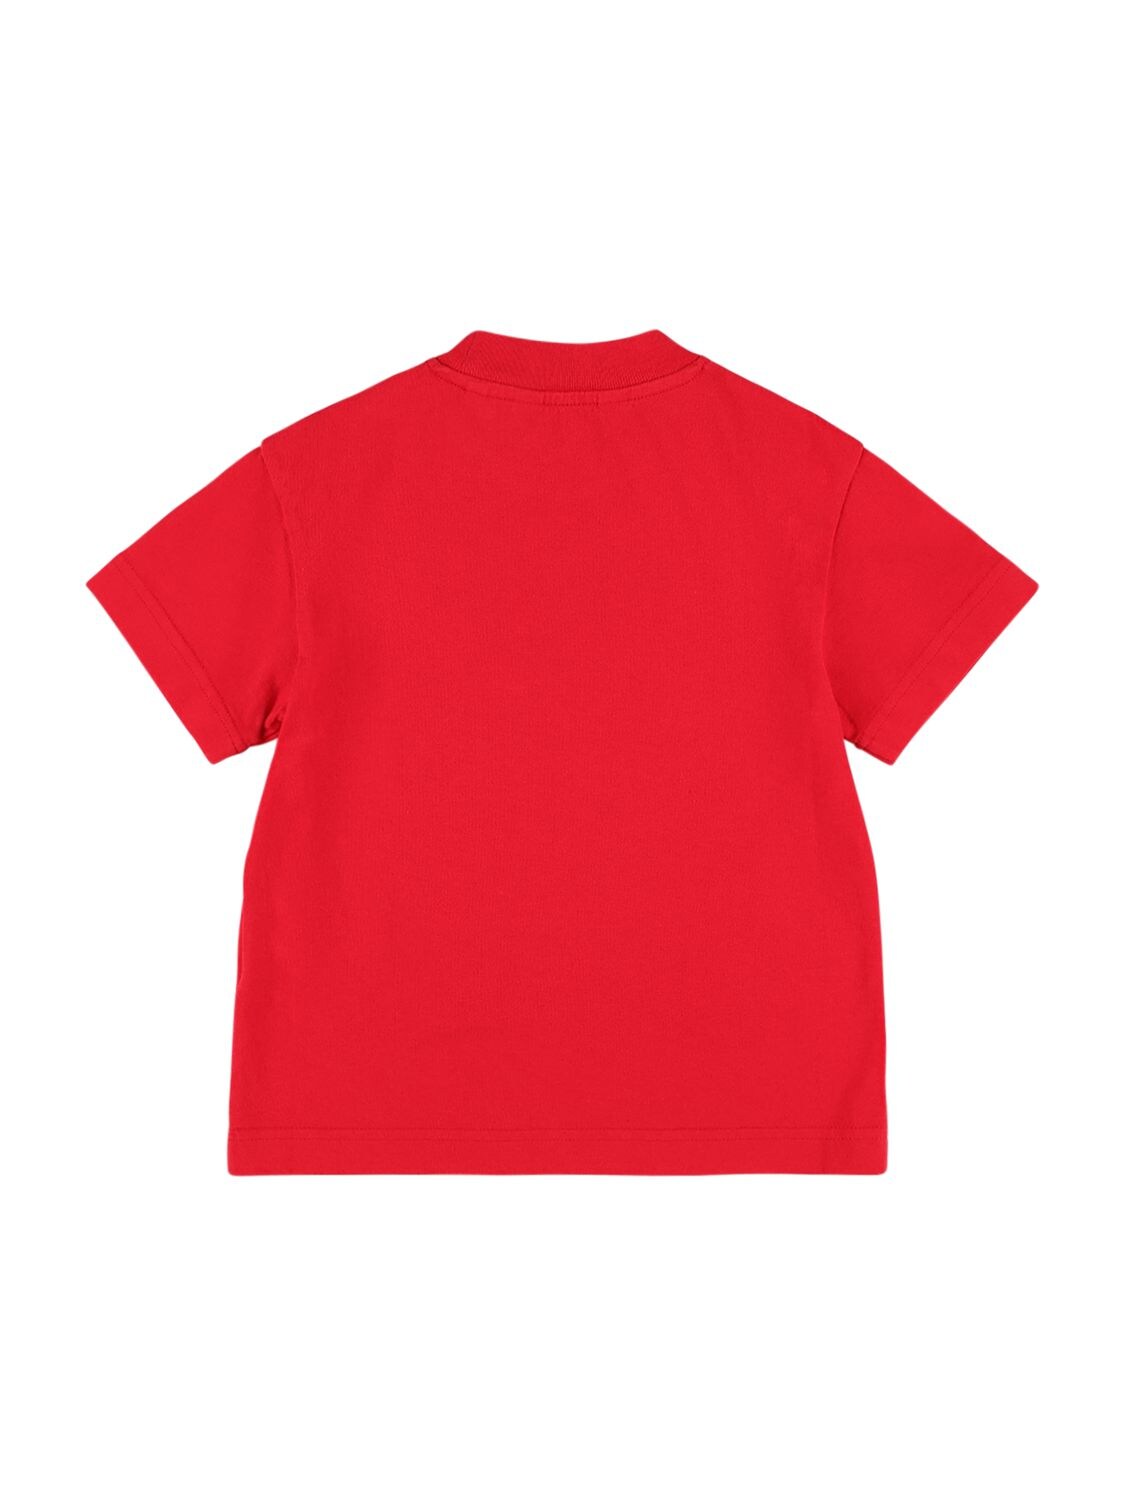 Shop Palm Angels Shark Print Cotton Jersey T-shirt In Red